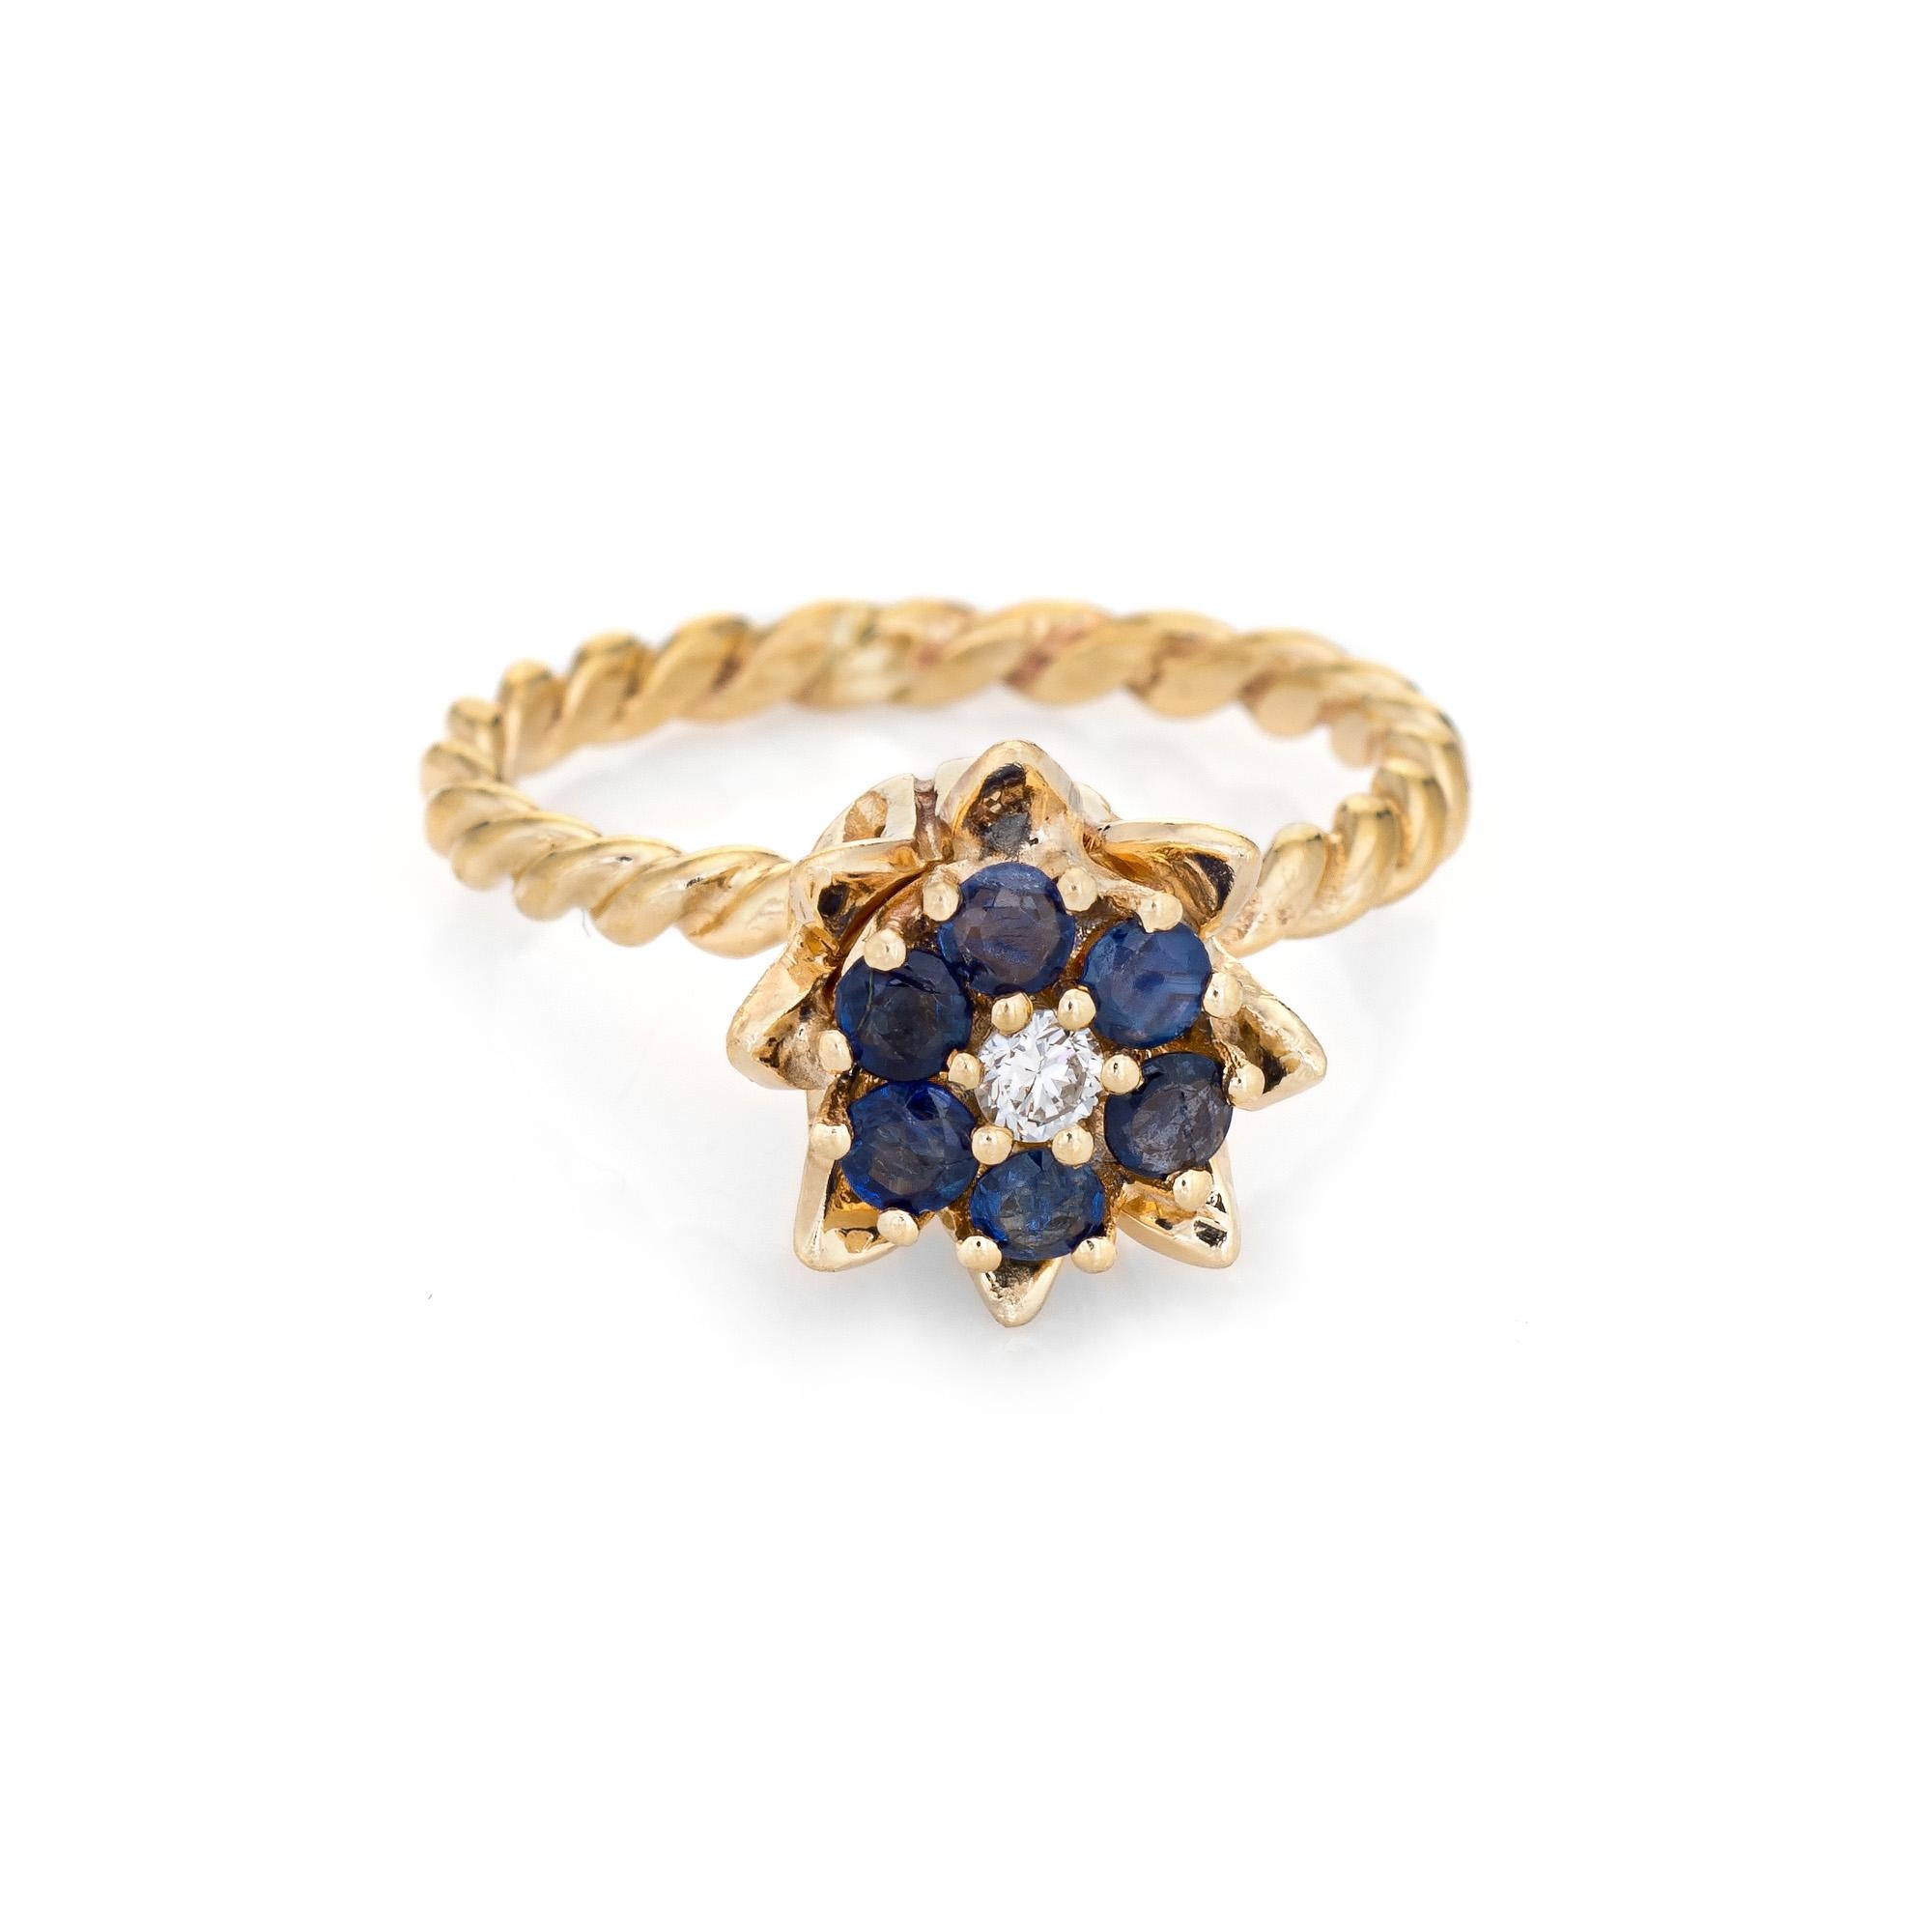 Stylish vintage sapphire & diamond tulip ring (circa 1960s to 1970s) crafted in 14 karat yellow gold. 

Round brilliant cut diamond is estimated 0.03 carats (estimated at G-H color and VS2 clarity). Six sapphires total an estimated 0.35 carats. The